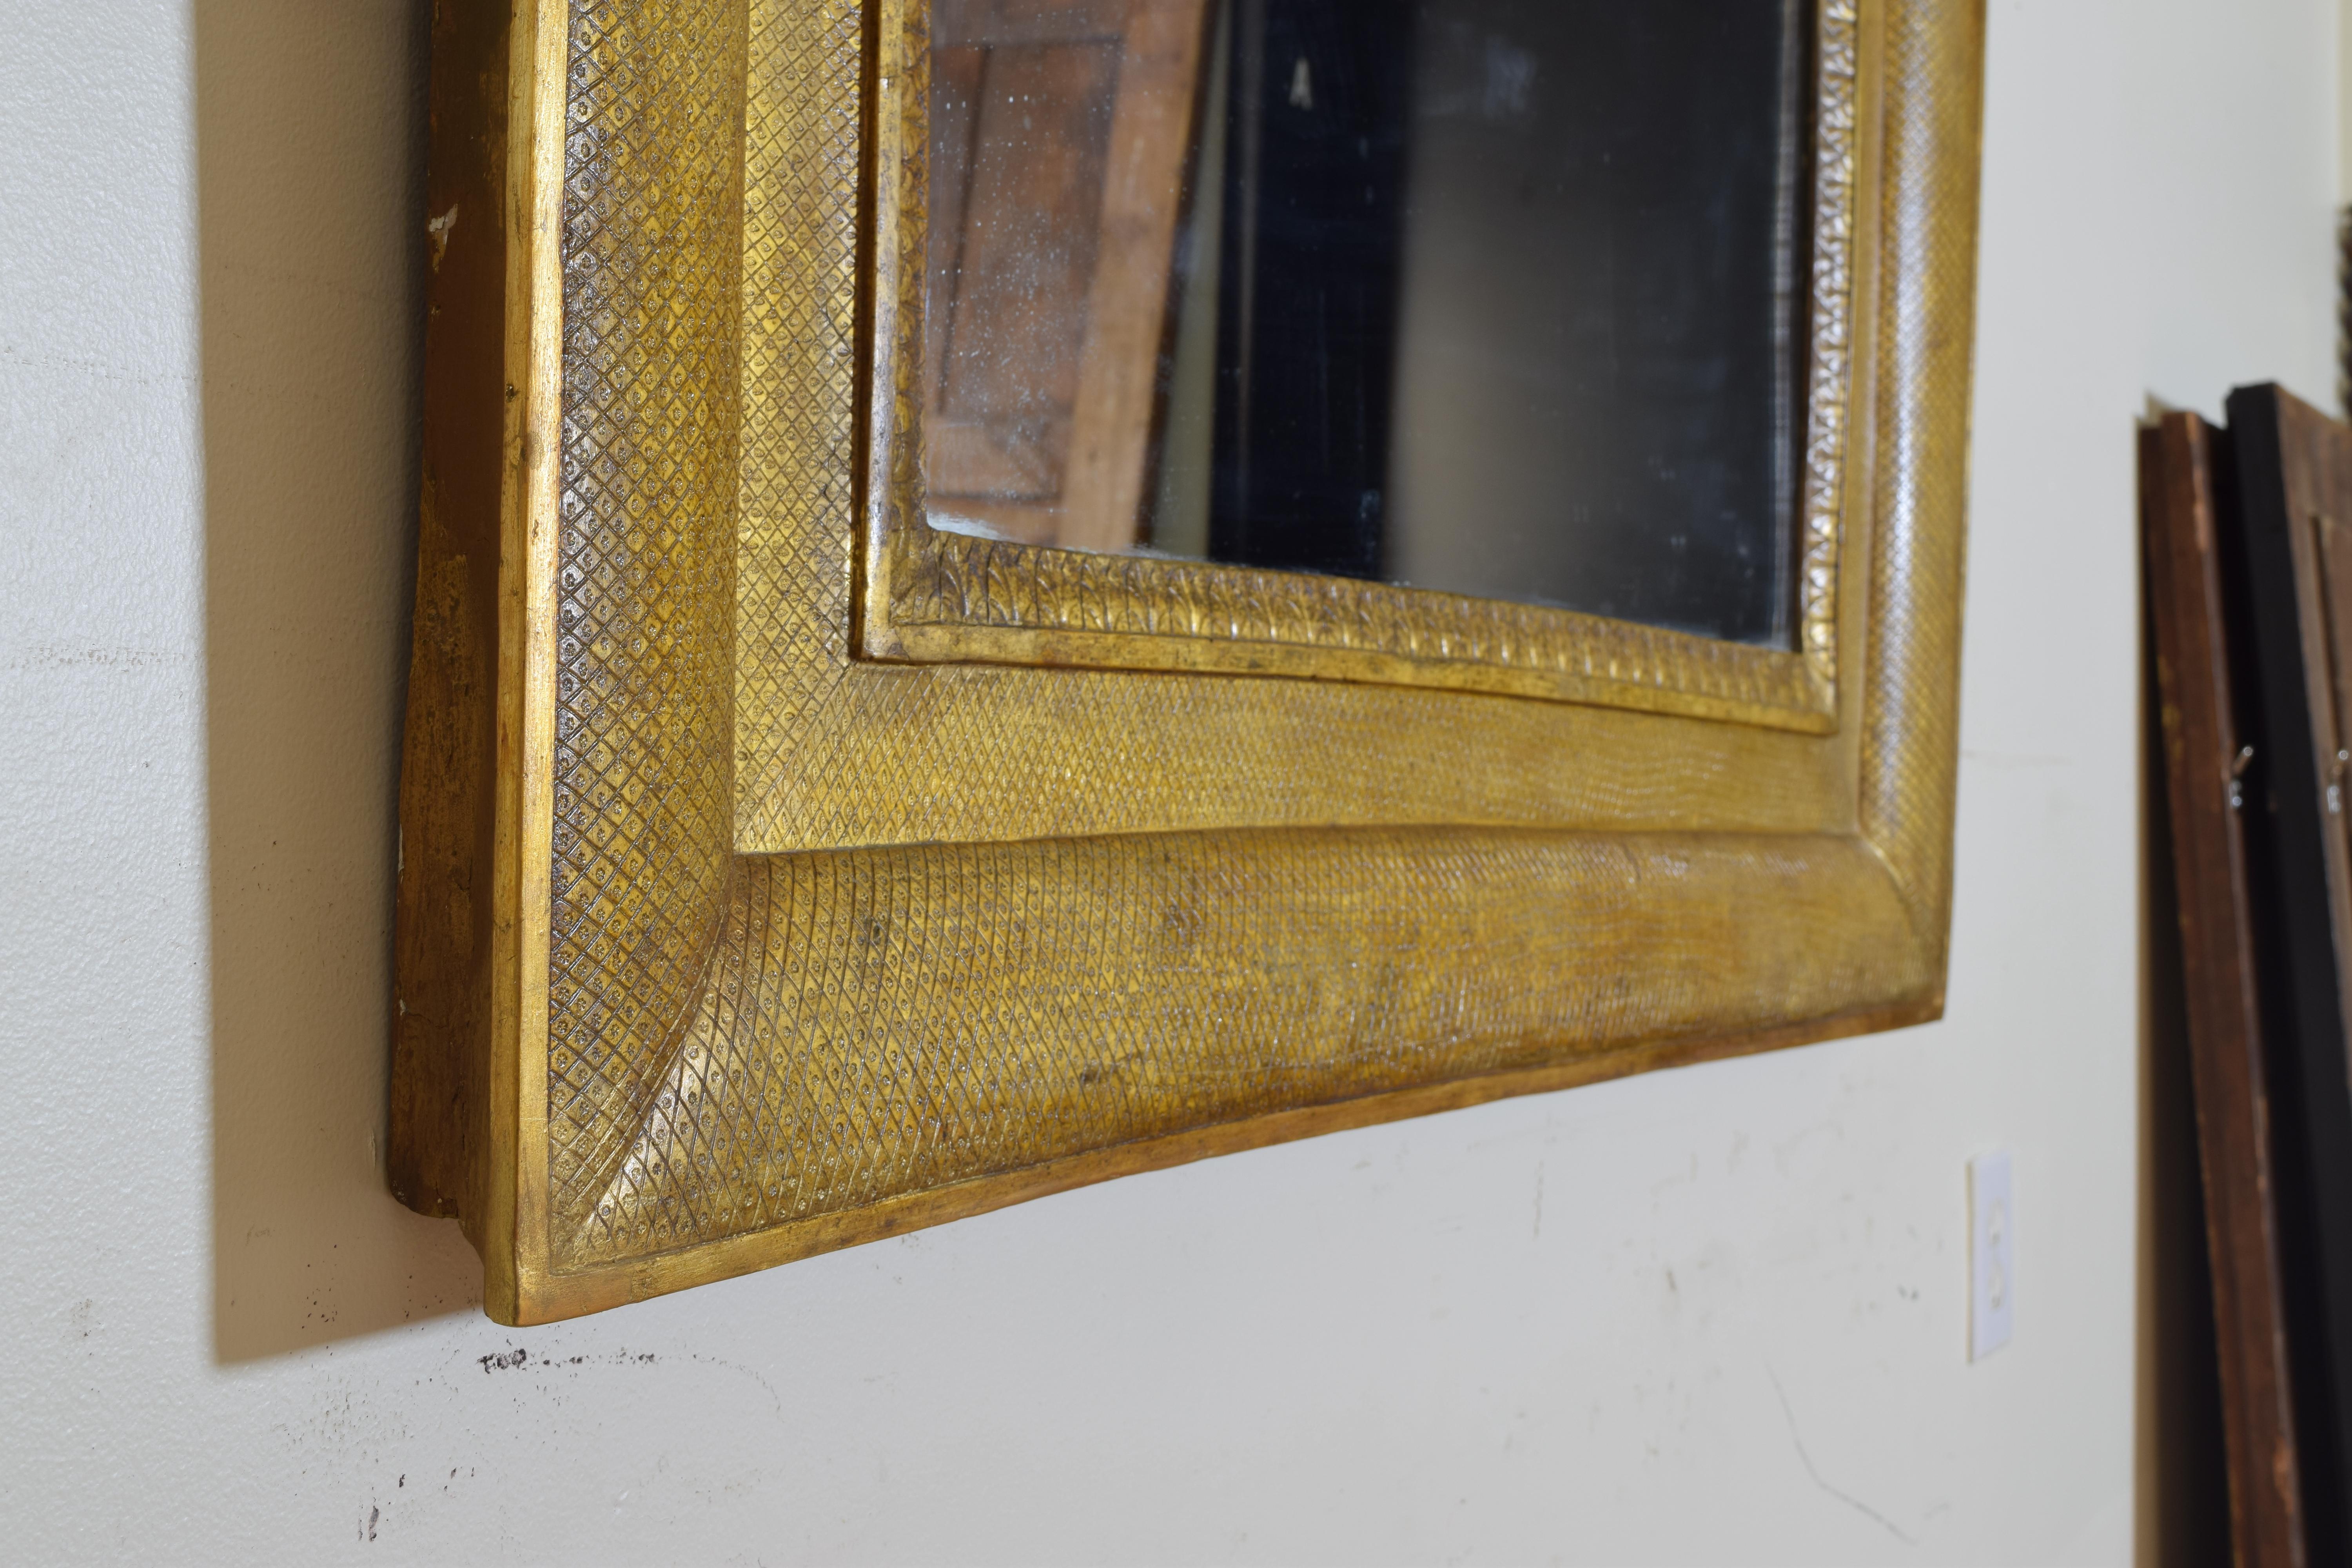 Giltwood Italian Empire Large Precisely Incised Gilt Gesso Wall Mirror Early 19th Century For Sale